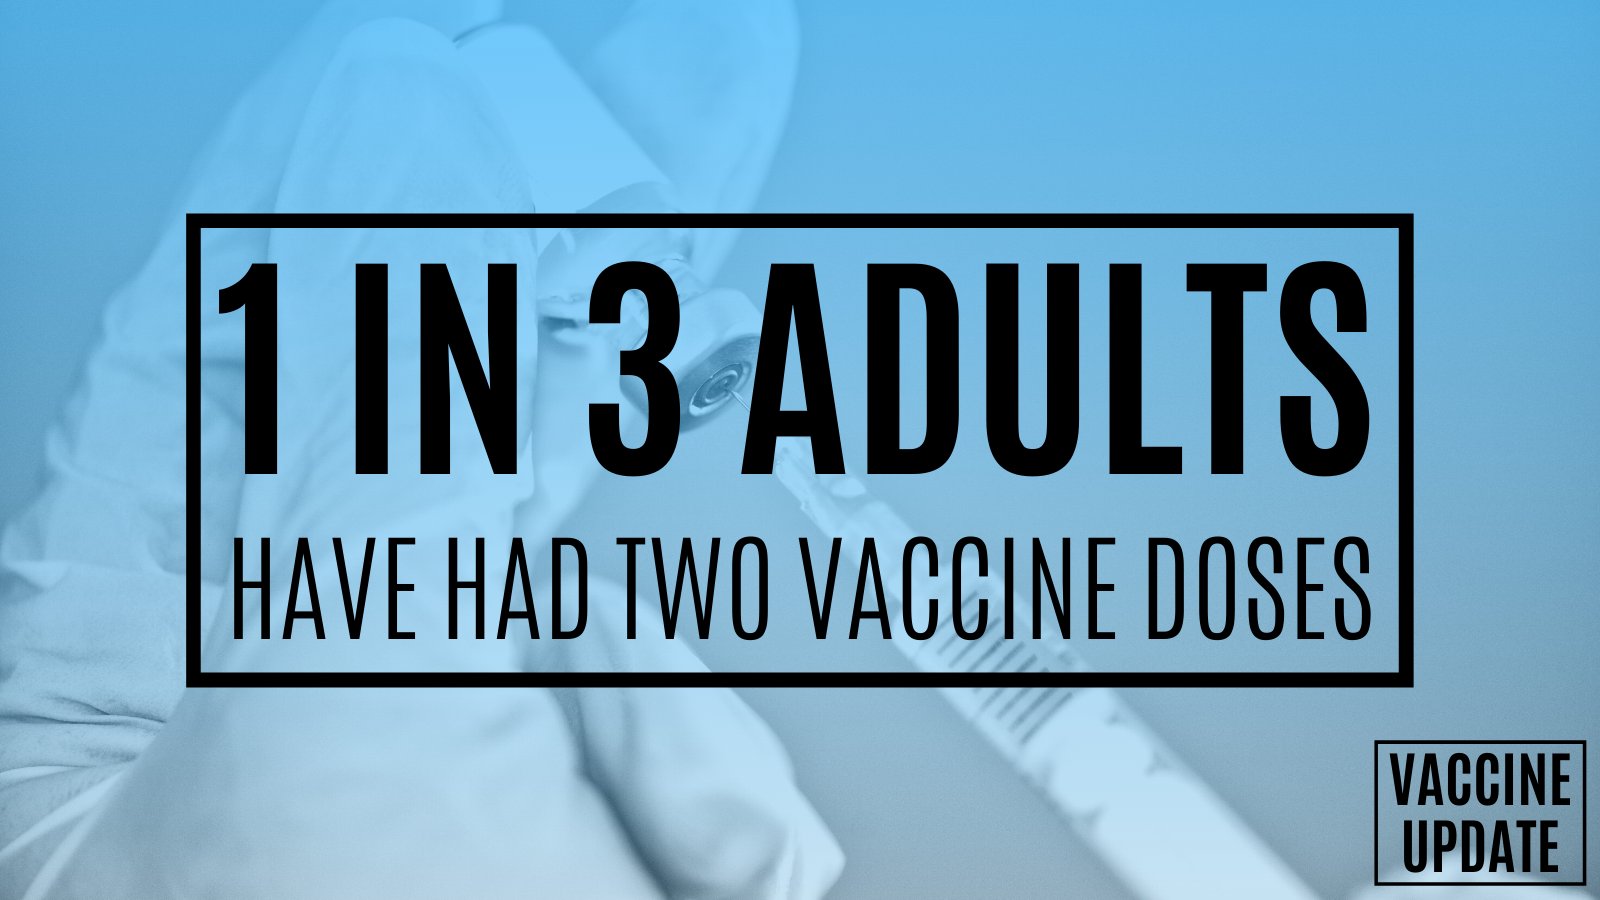 1 in 3 adults have had two vaccine doses